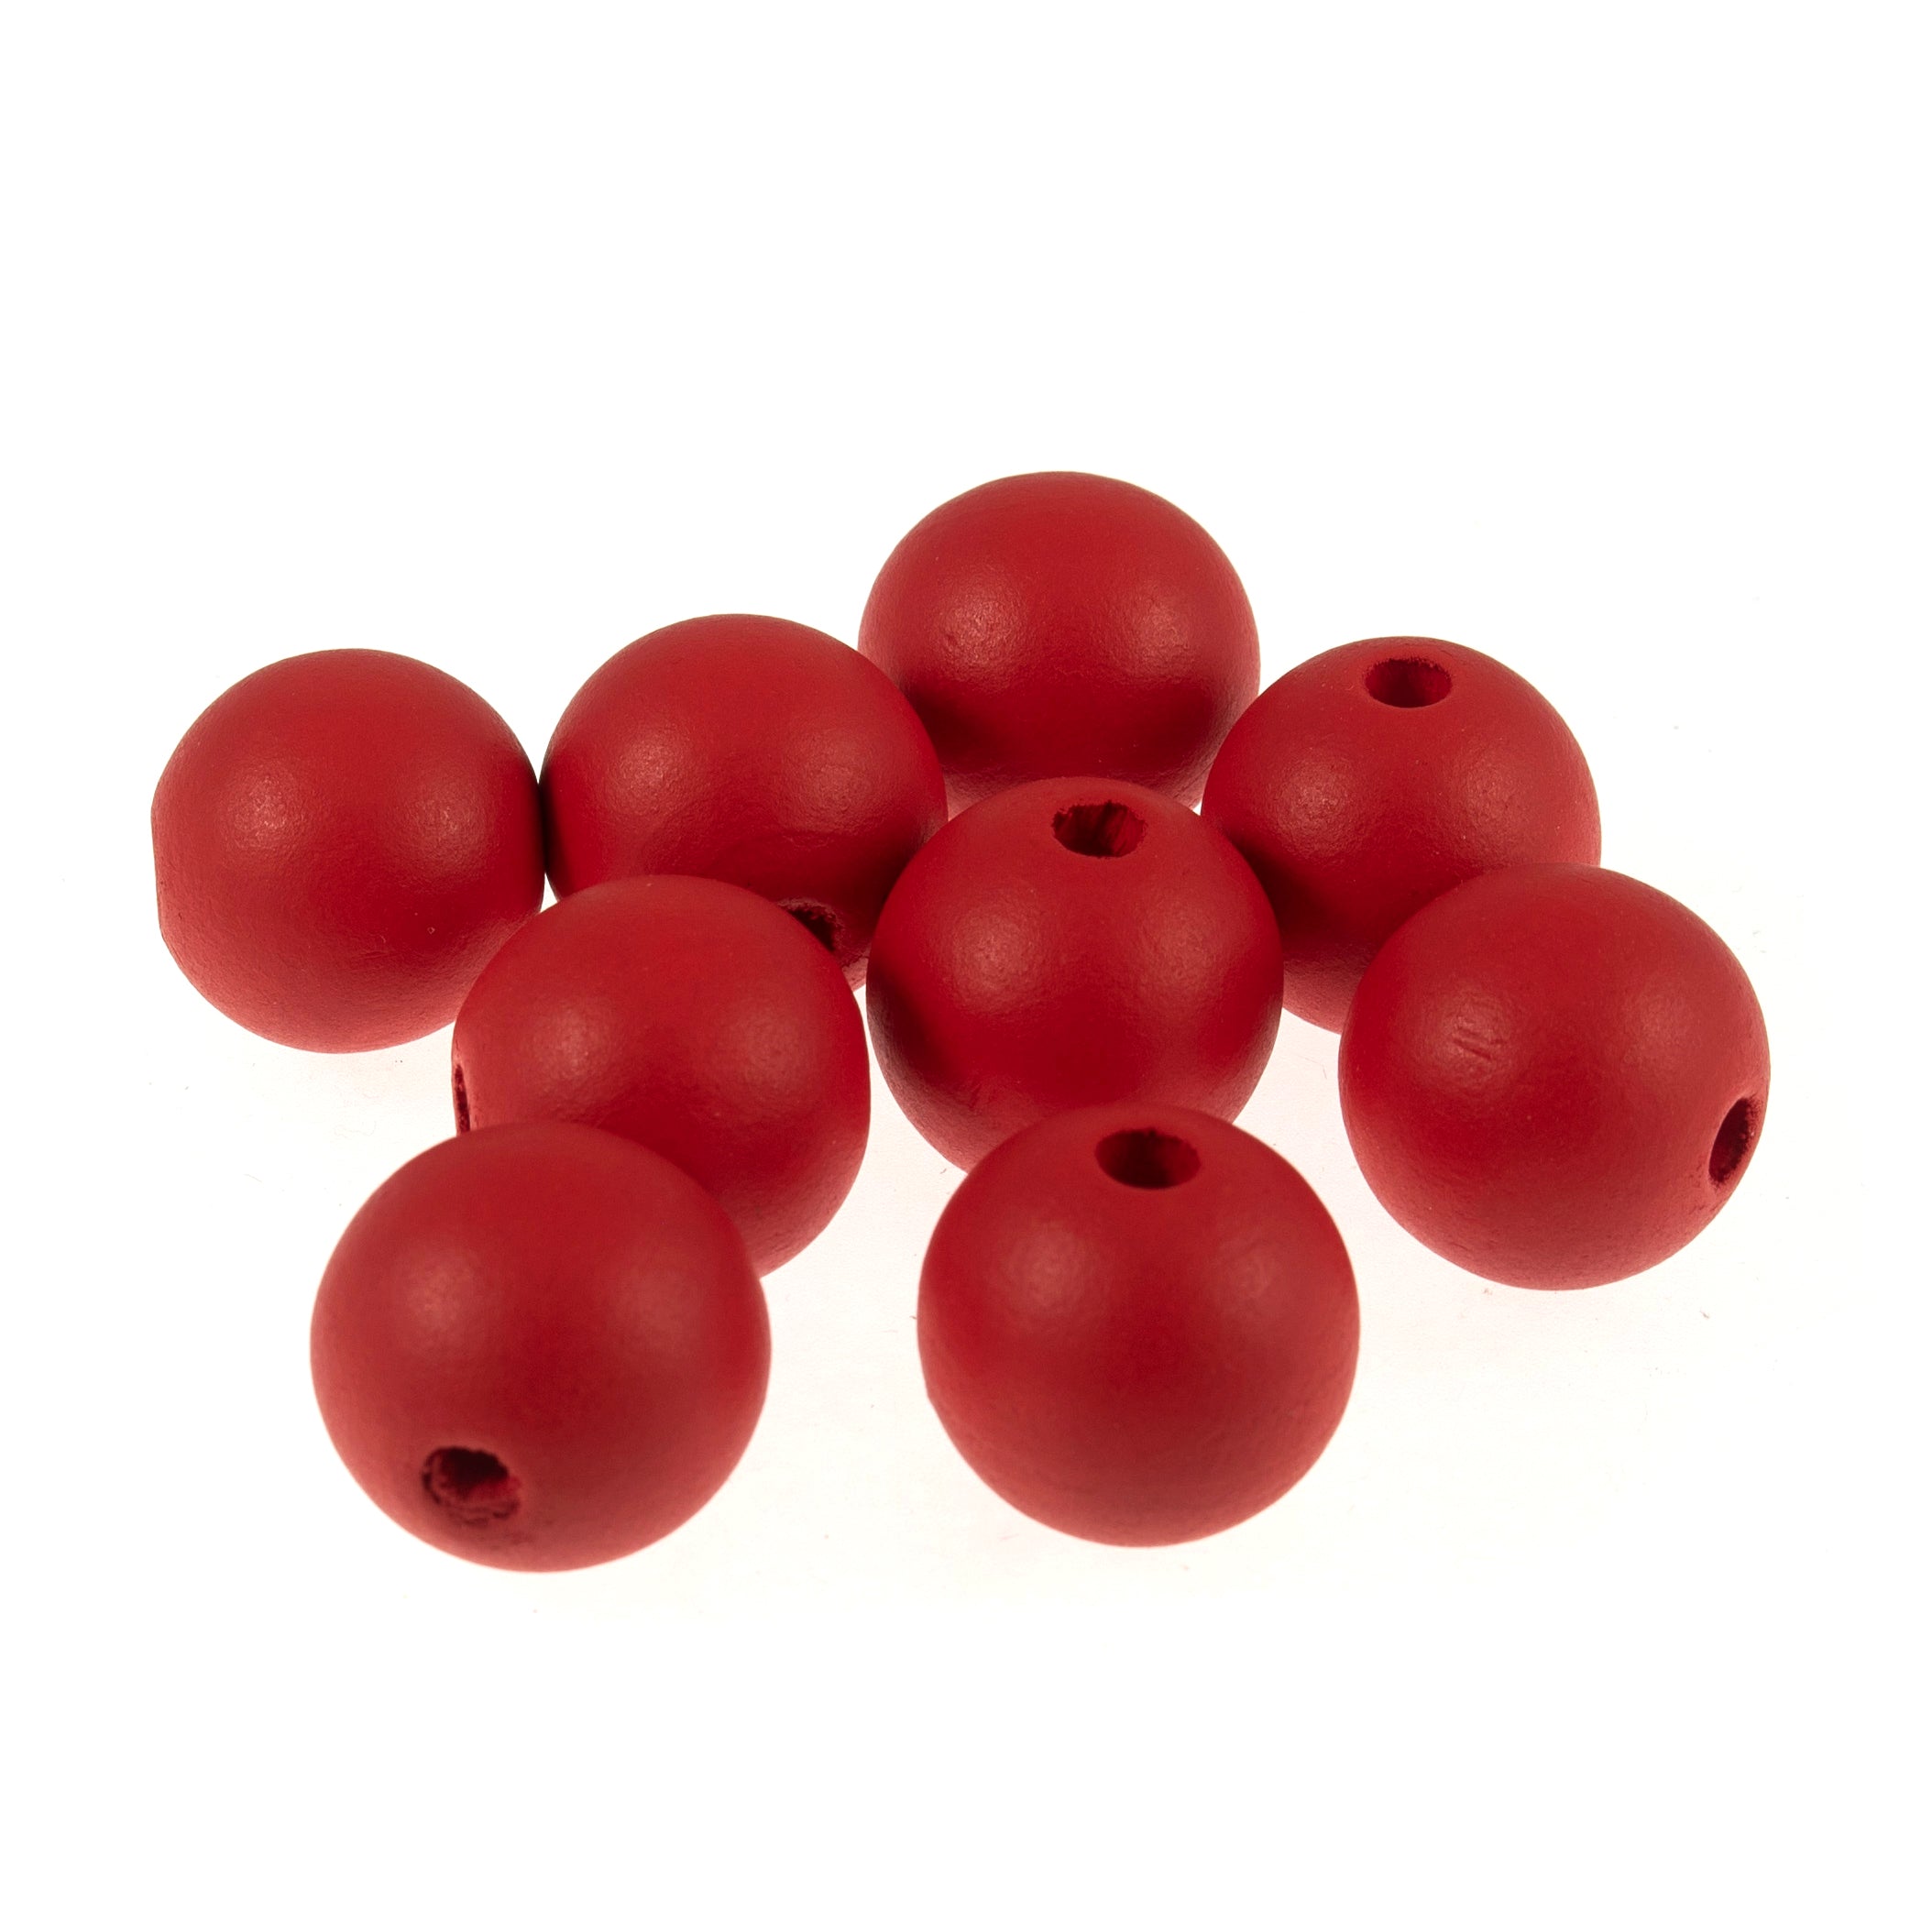 Trimits 25mm Wooden Craft Beads for Macramé - Red